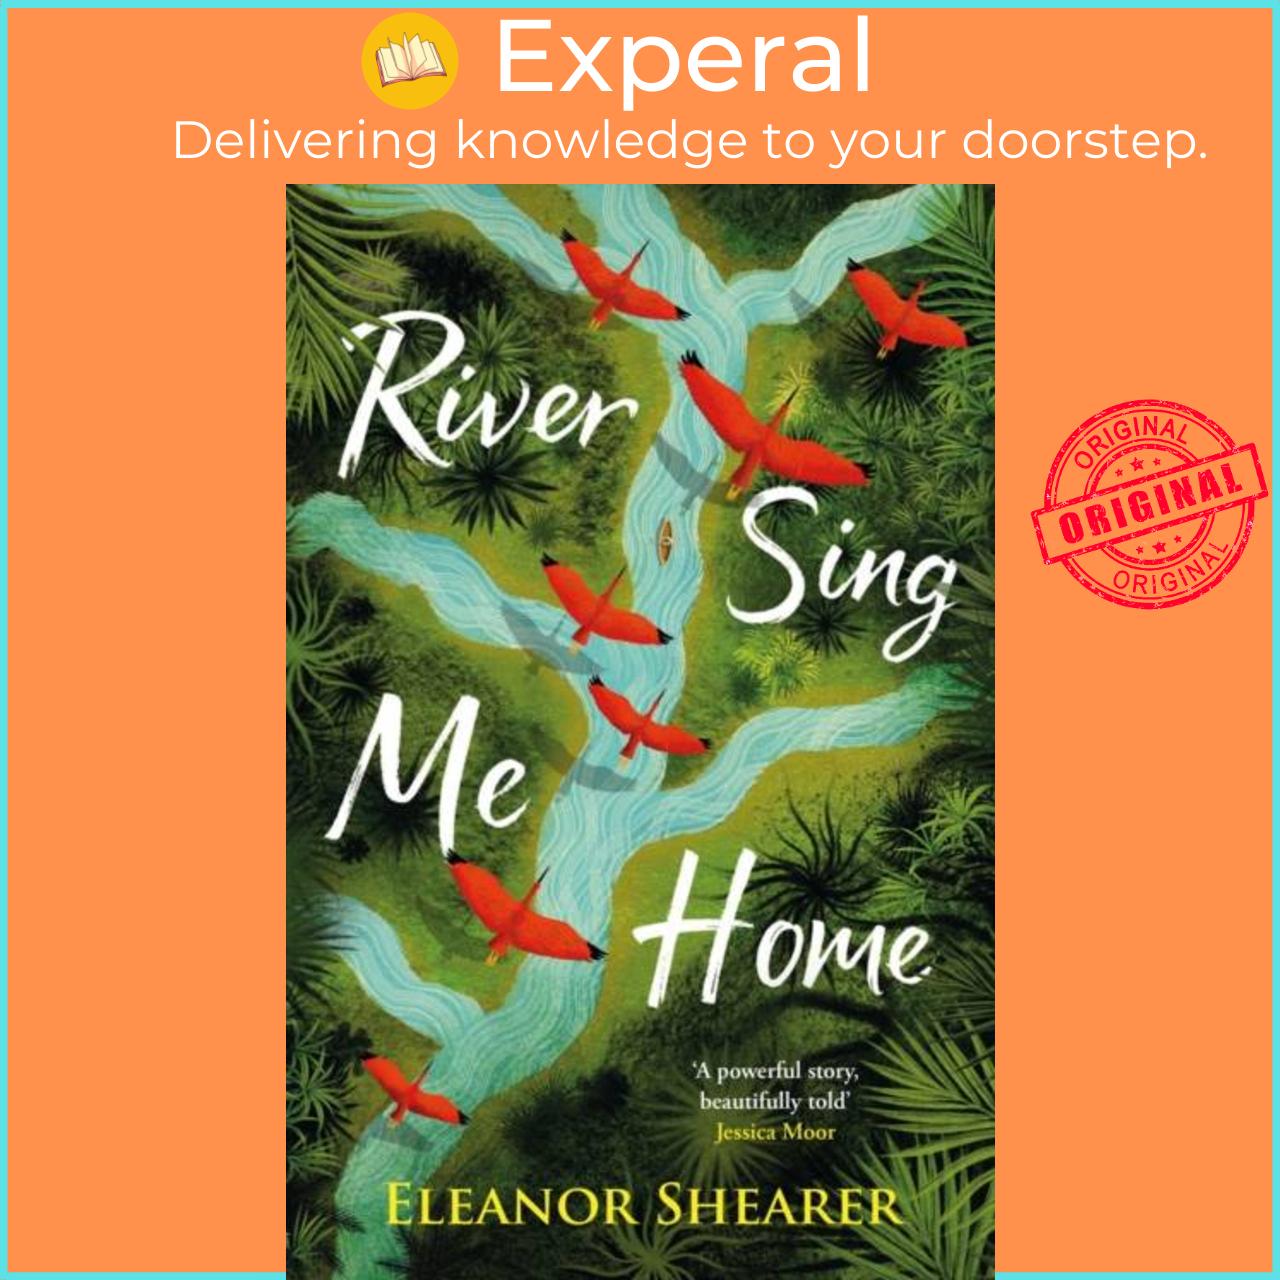 Sách - River Sing Me Home - A beautiful novel of courage, hope and finding fa by Eleanor Shearer (UK edition, hardcover)